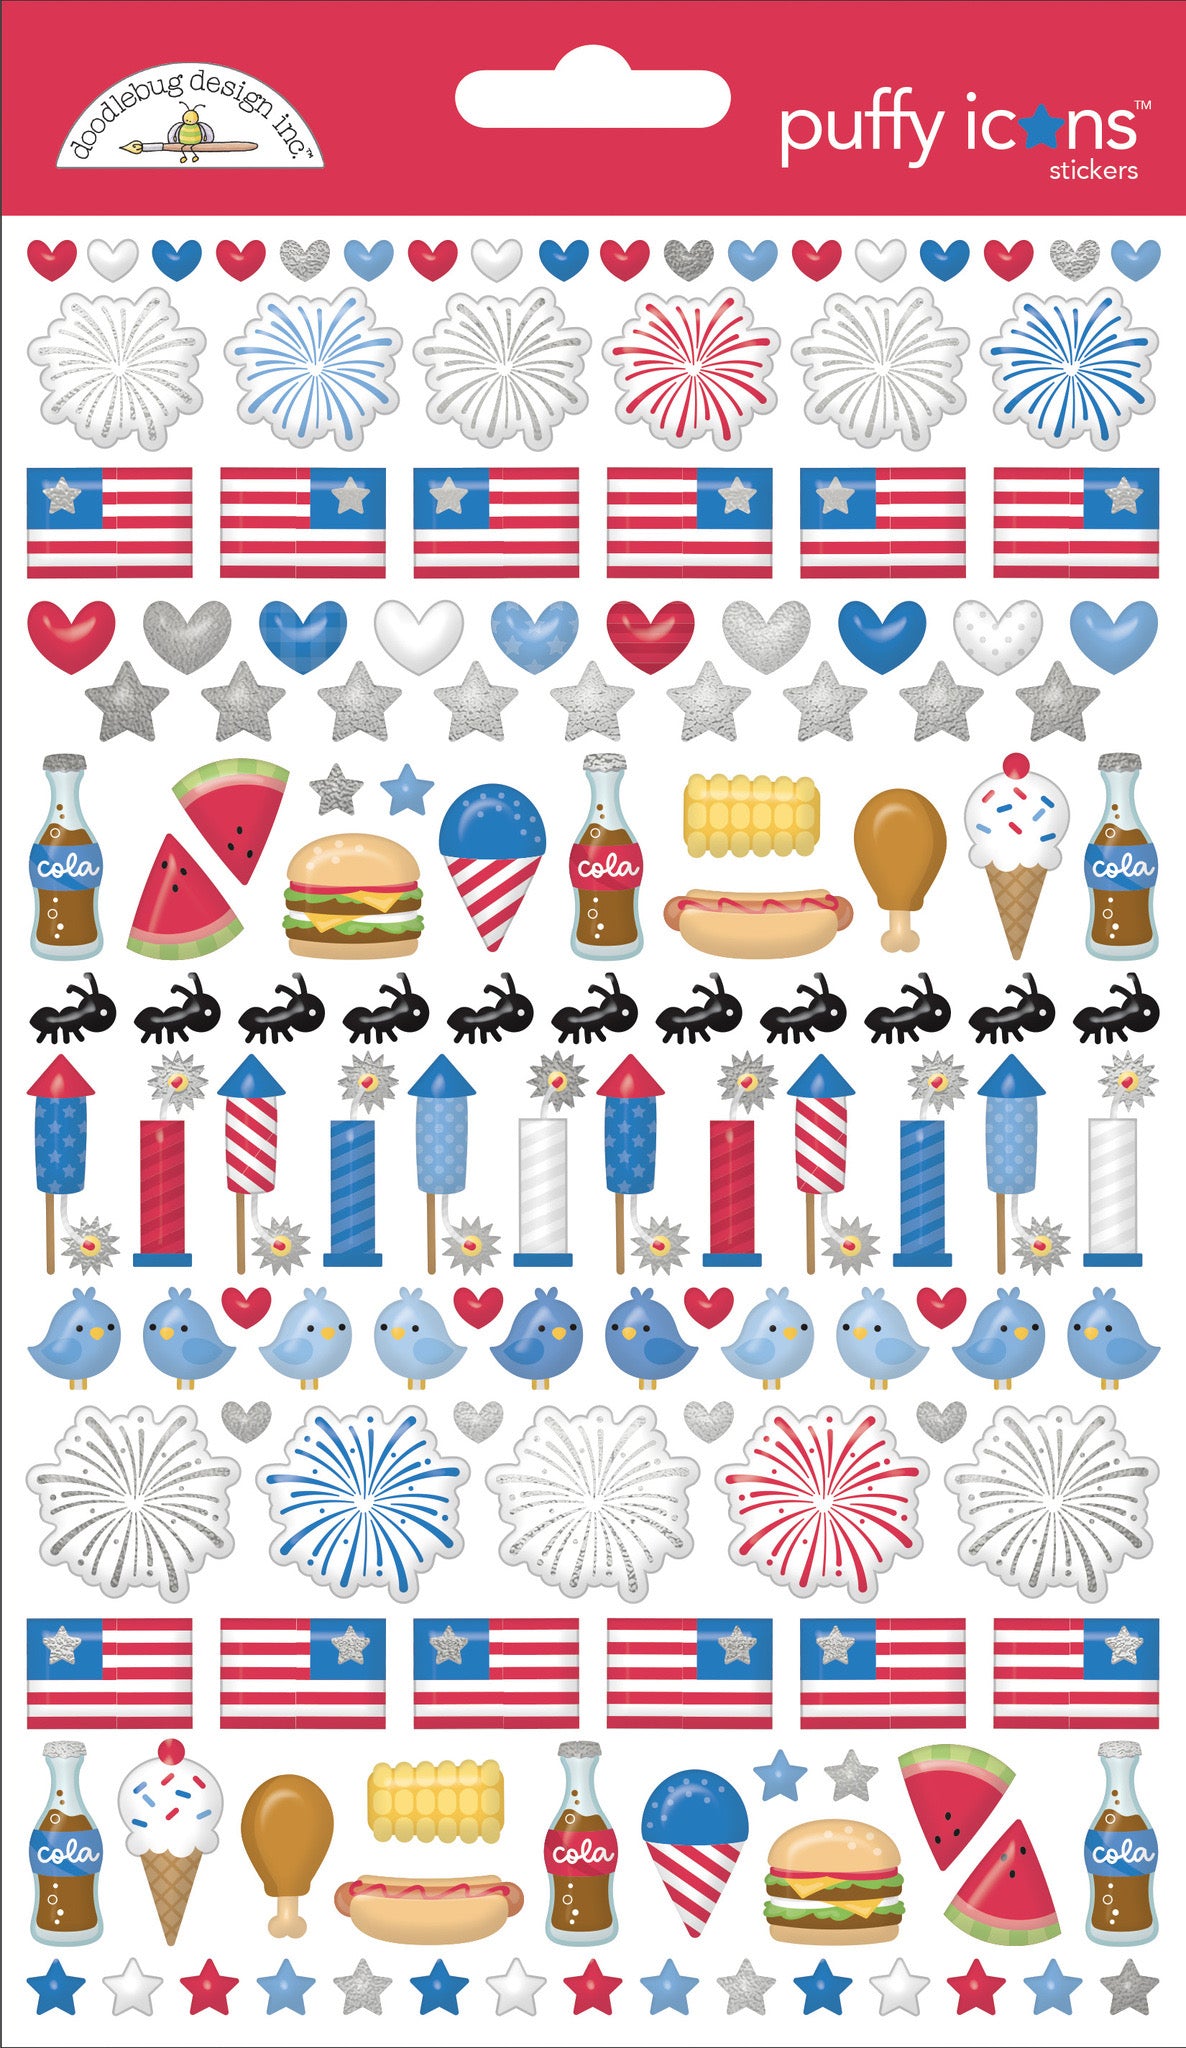 Patriotic Puffy Icon Stickers